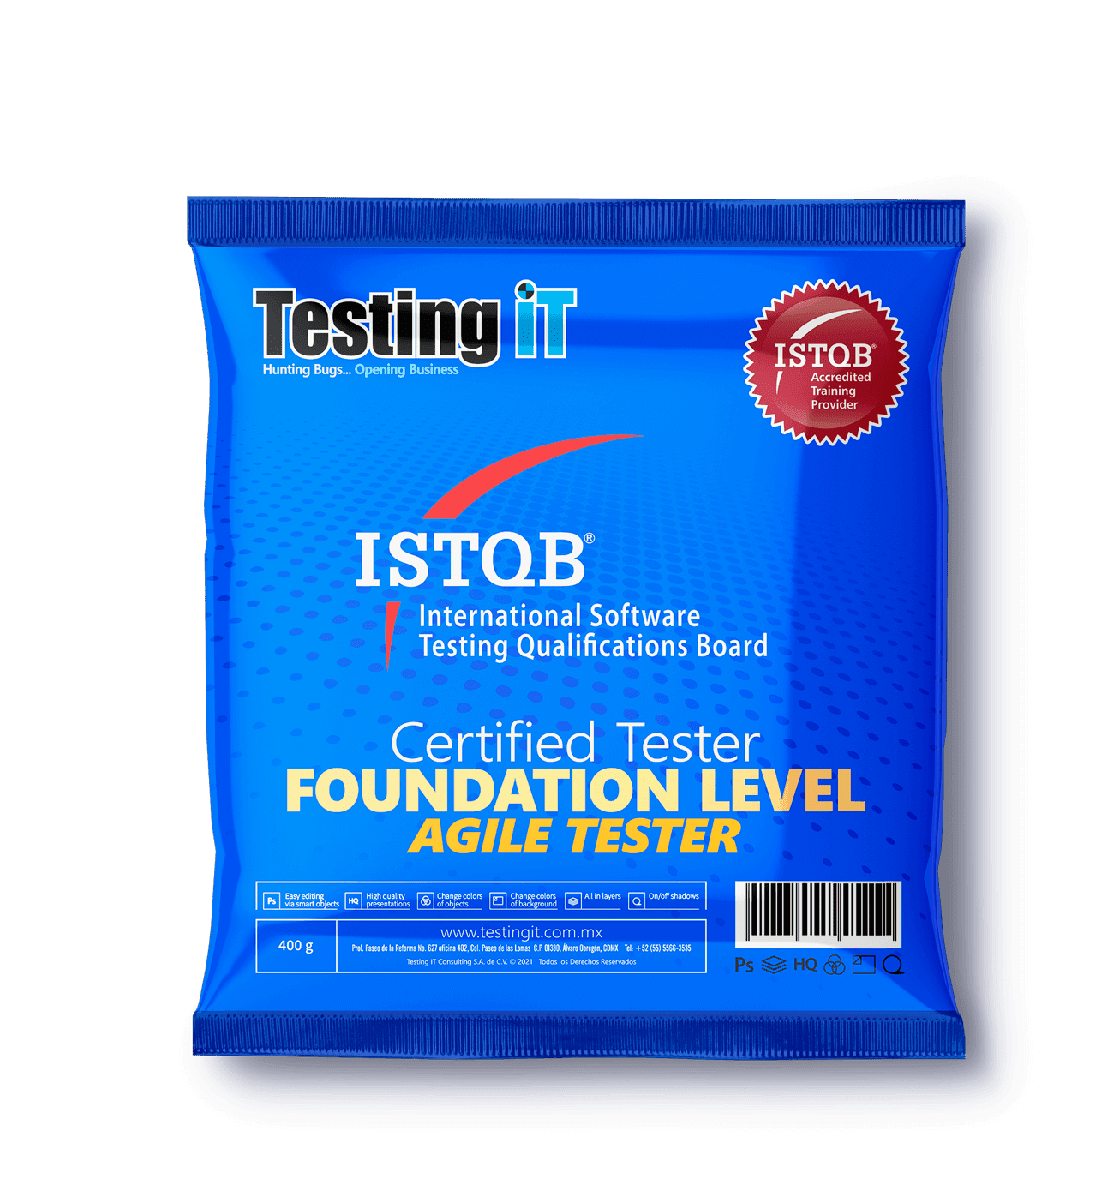 ISTQB-Certified-Tester-Foundation-Level-Agile-Tester